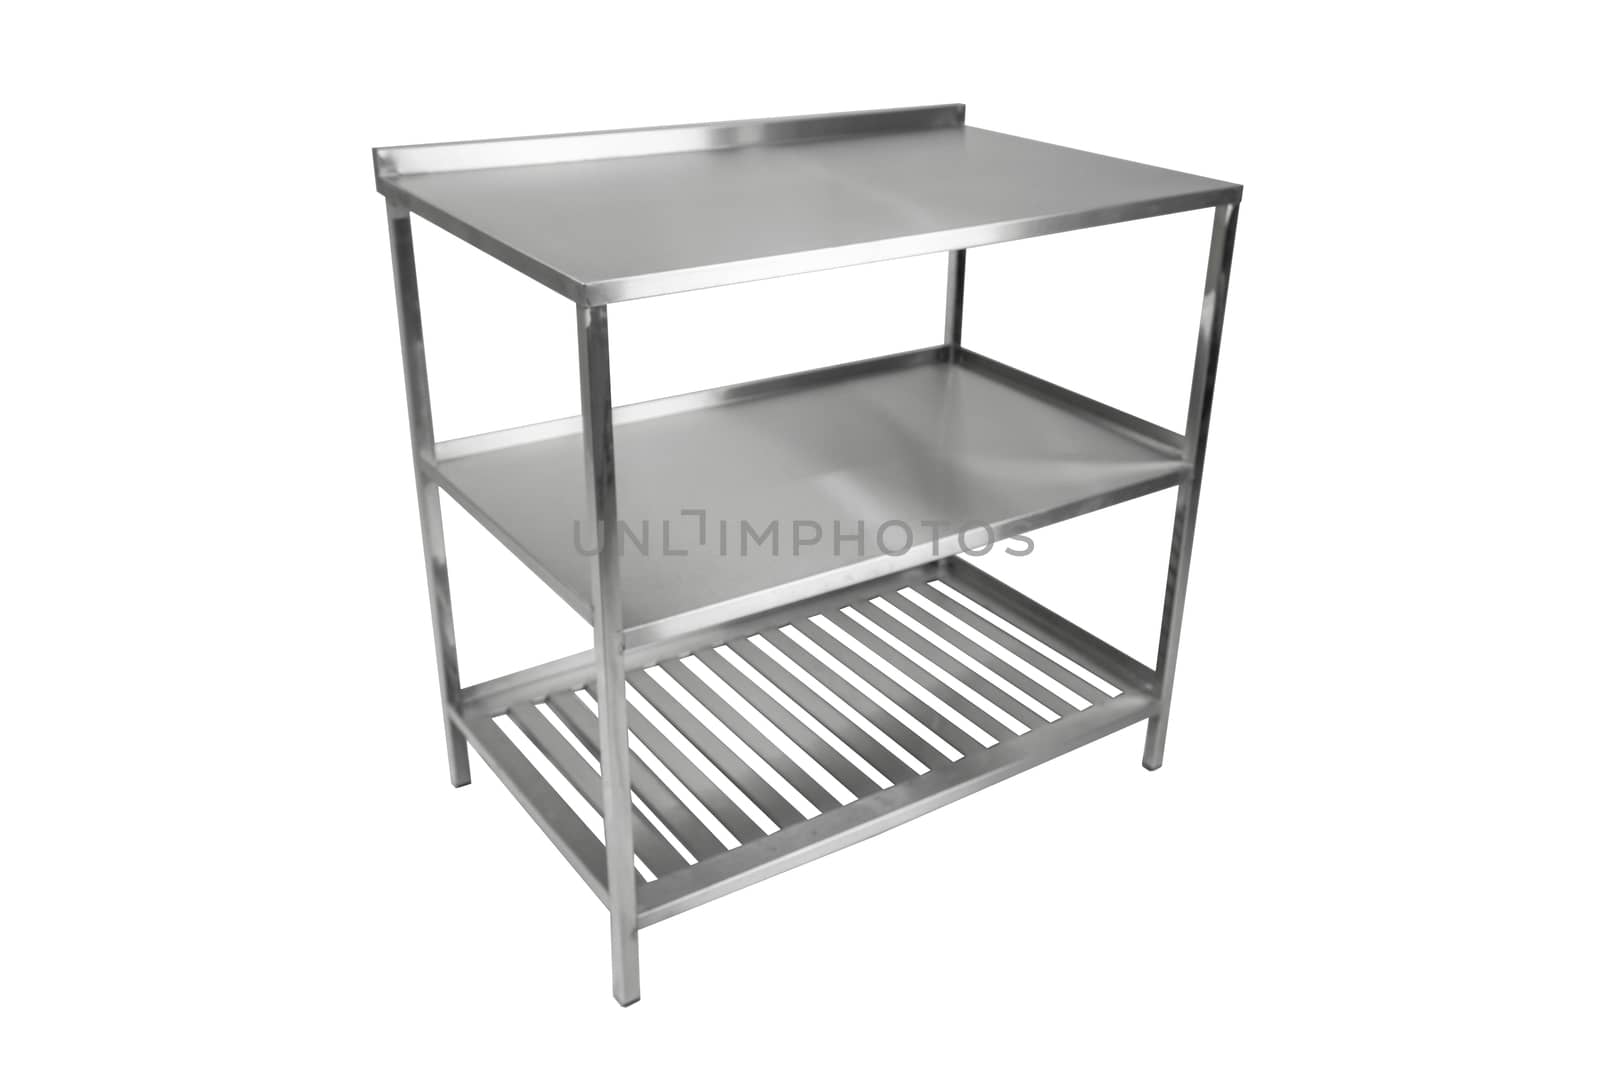 Blurred Table of stainless on isolated white background. by Buttus_casso